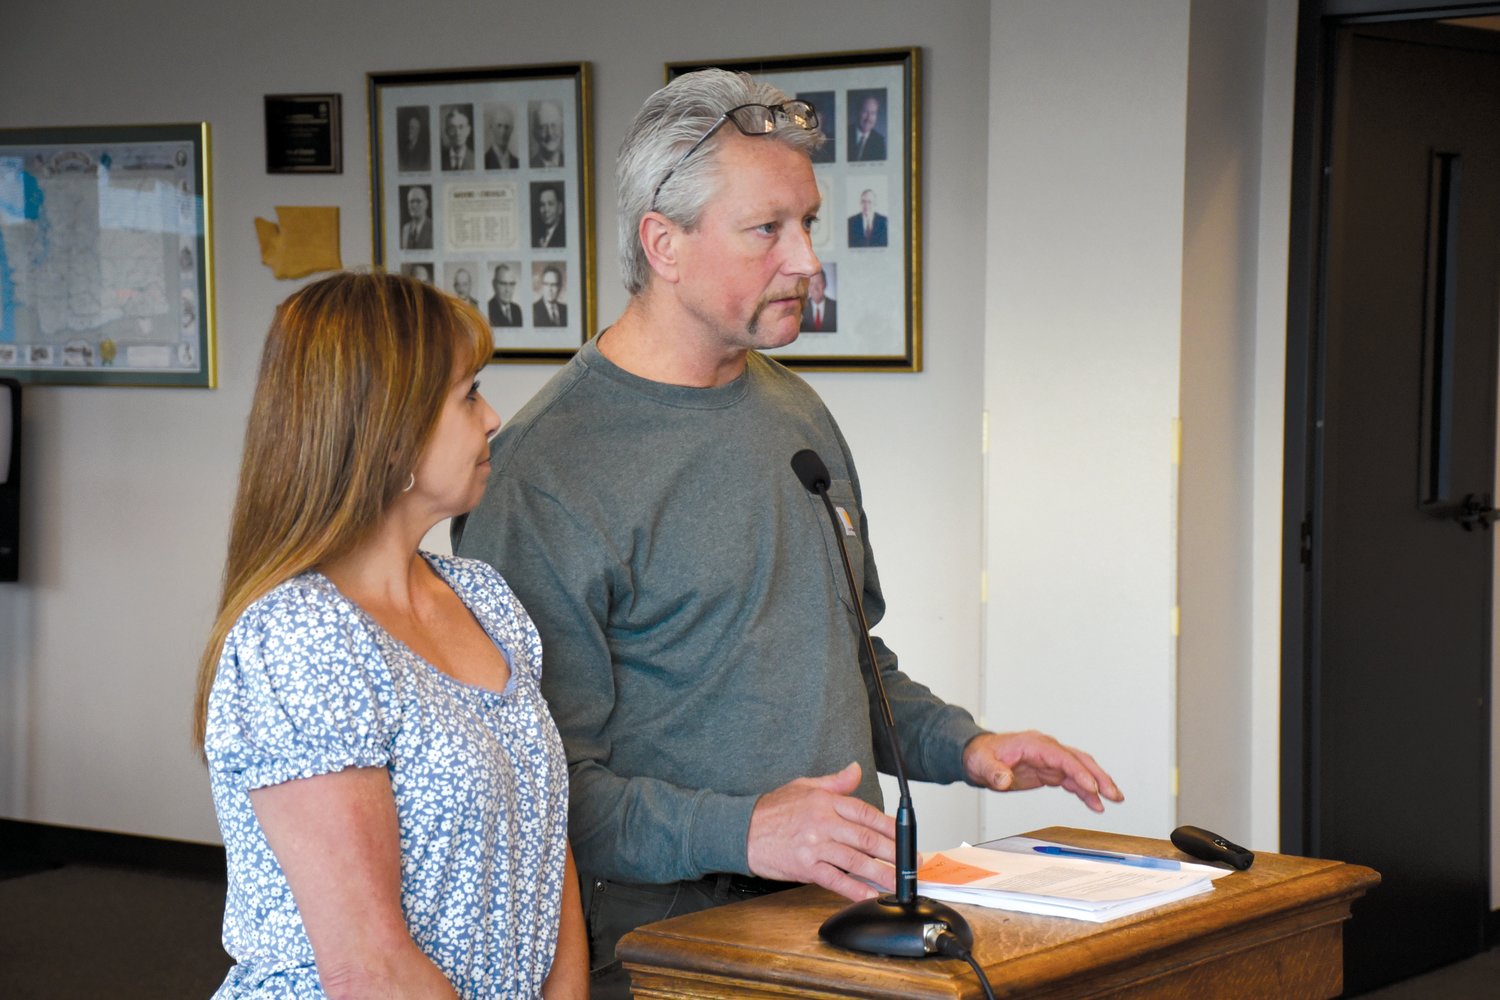 Kevin and Melody Hicks, who are planning to build an RV park behind the Security State Bank lot on National Avenue in Chehalis, give public comment at Monday’s Chehalis City Council meeting, expressing concern over the city’s blanket traffic impact analysis requirement, which they say is hampering the progression of their planned development.